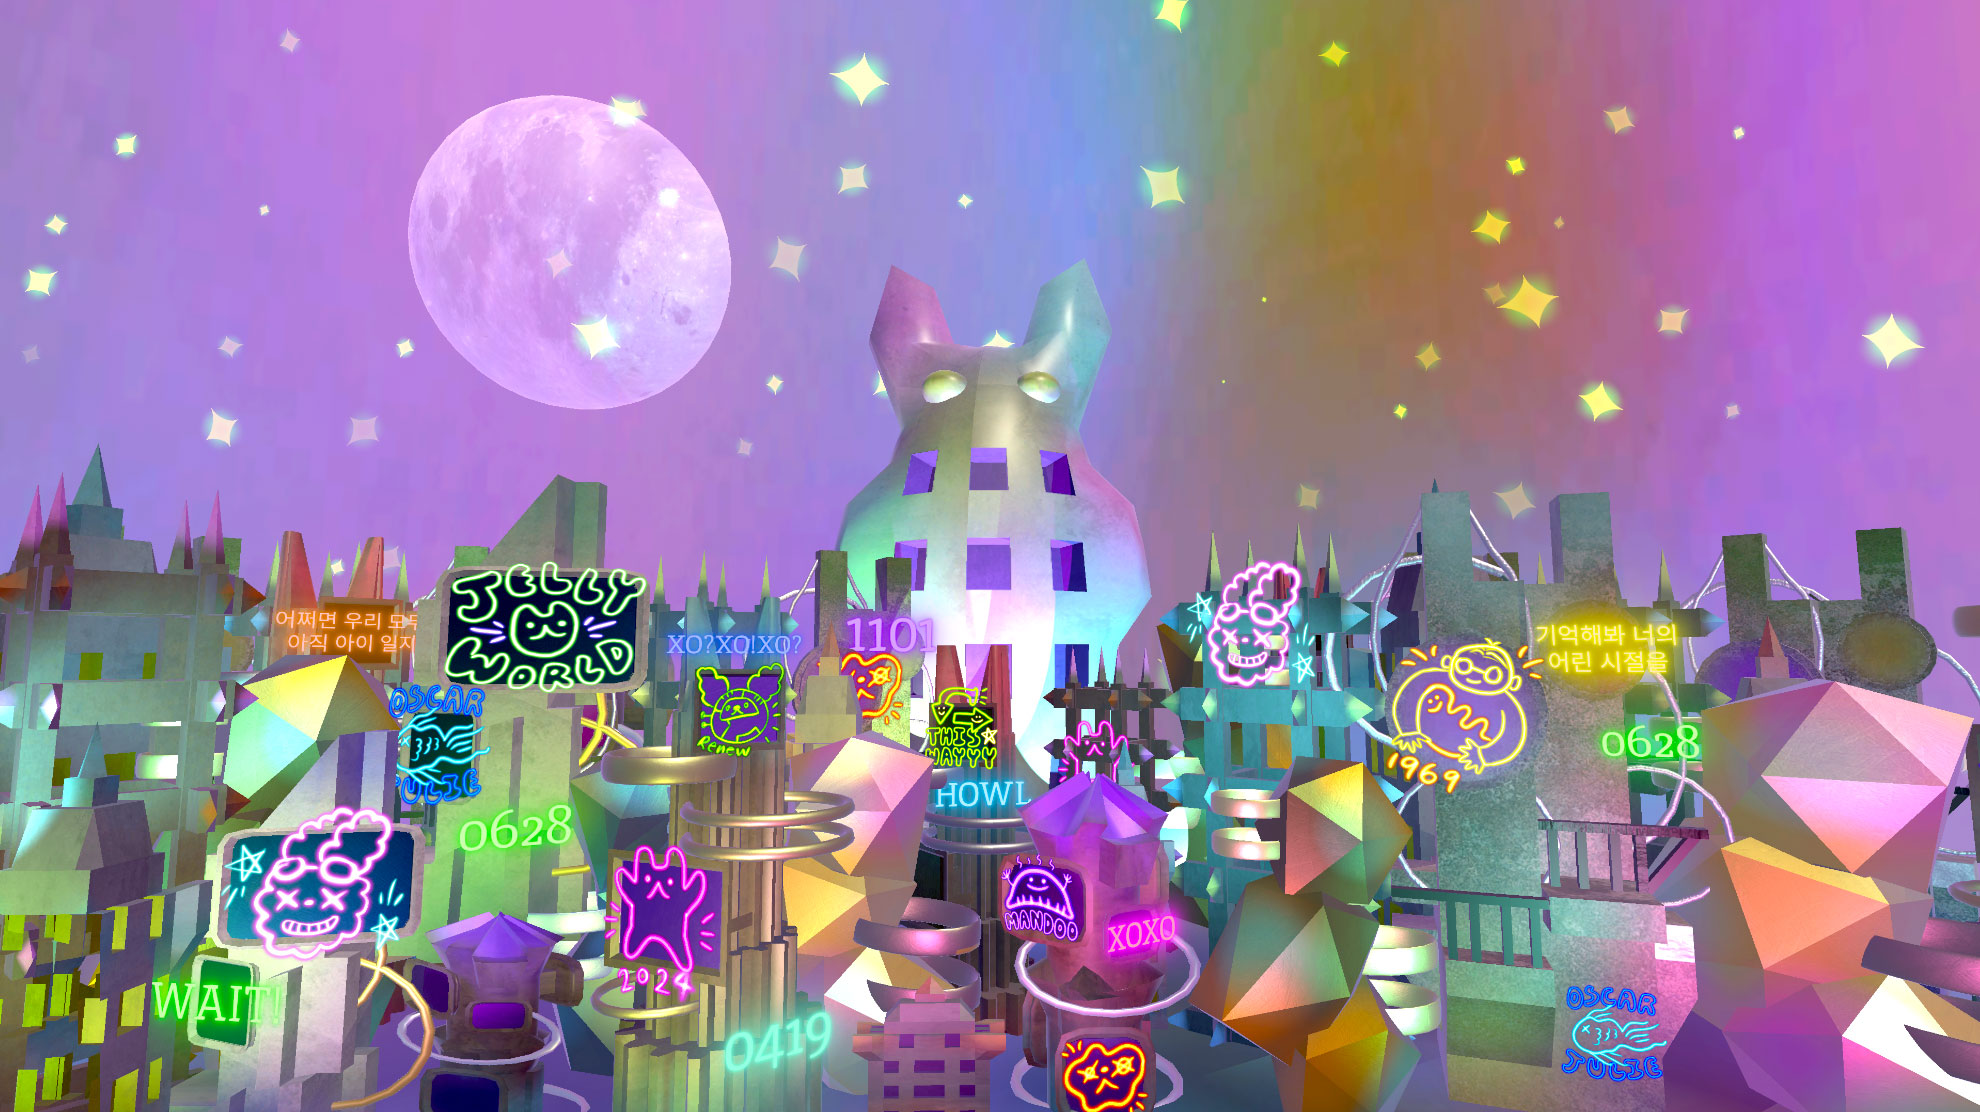 Vibrant cityscape under a colorful sky with a full moon, featuring neon signs and whimsical buildings, including a large cat-shaped structure.